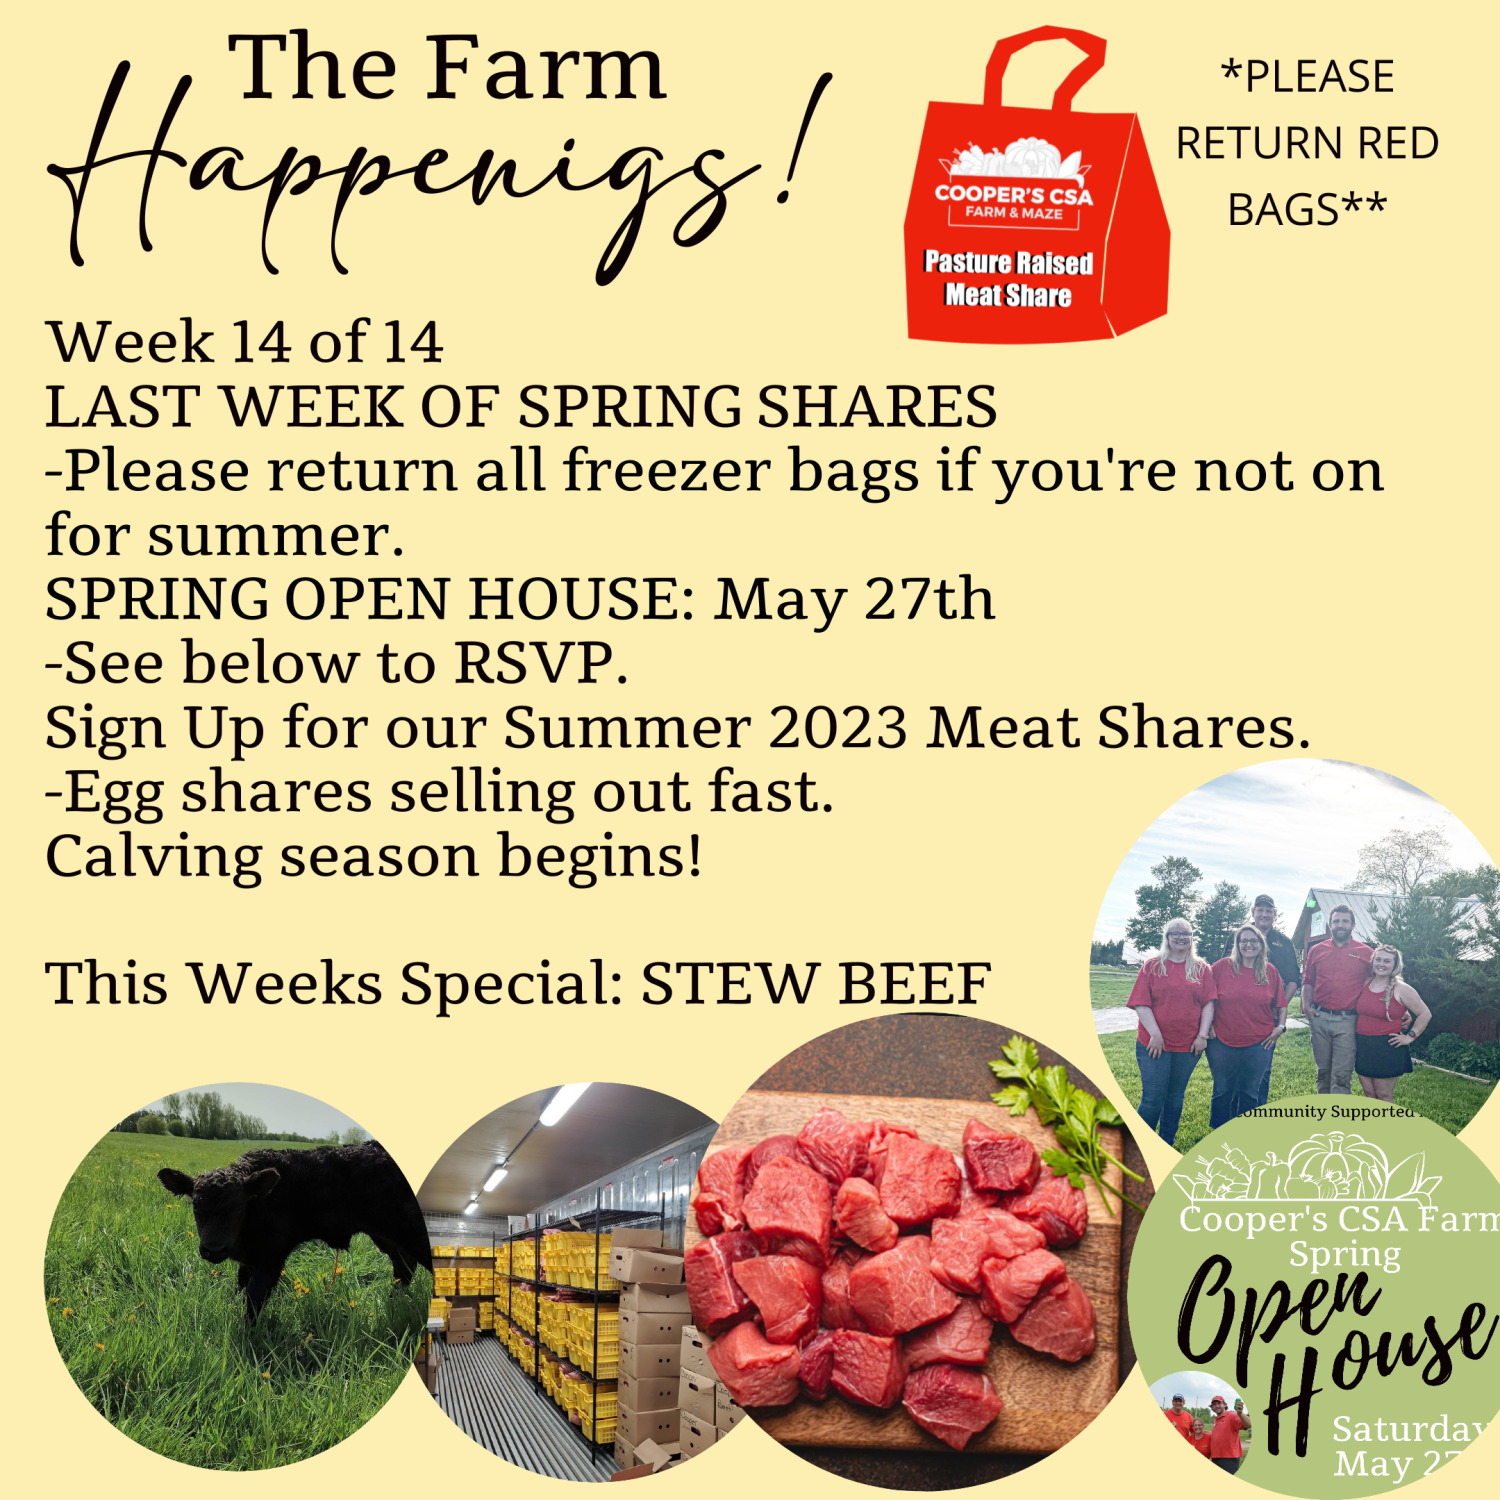 "Pasture Meat Shares"-Coopers CSA Farm Farm Happenings Week 14